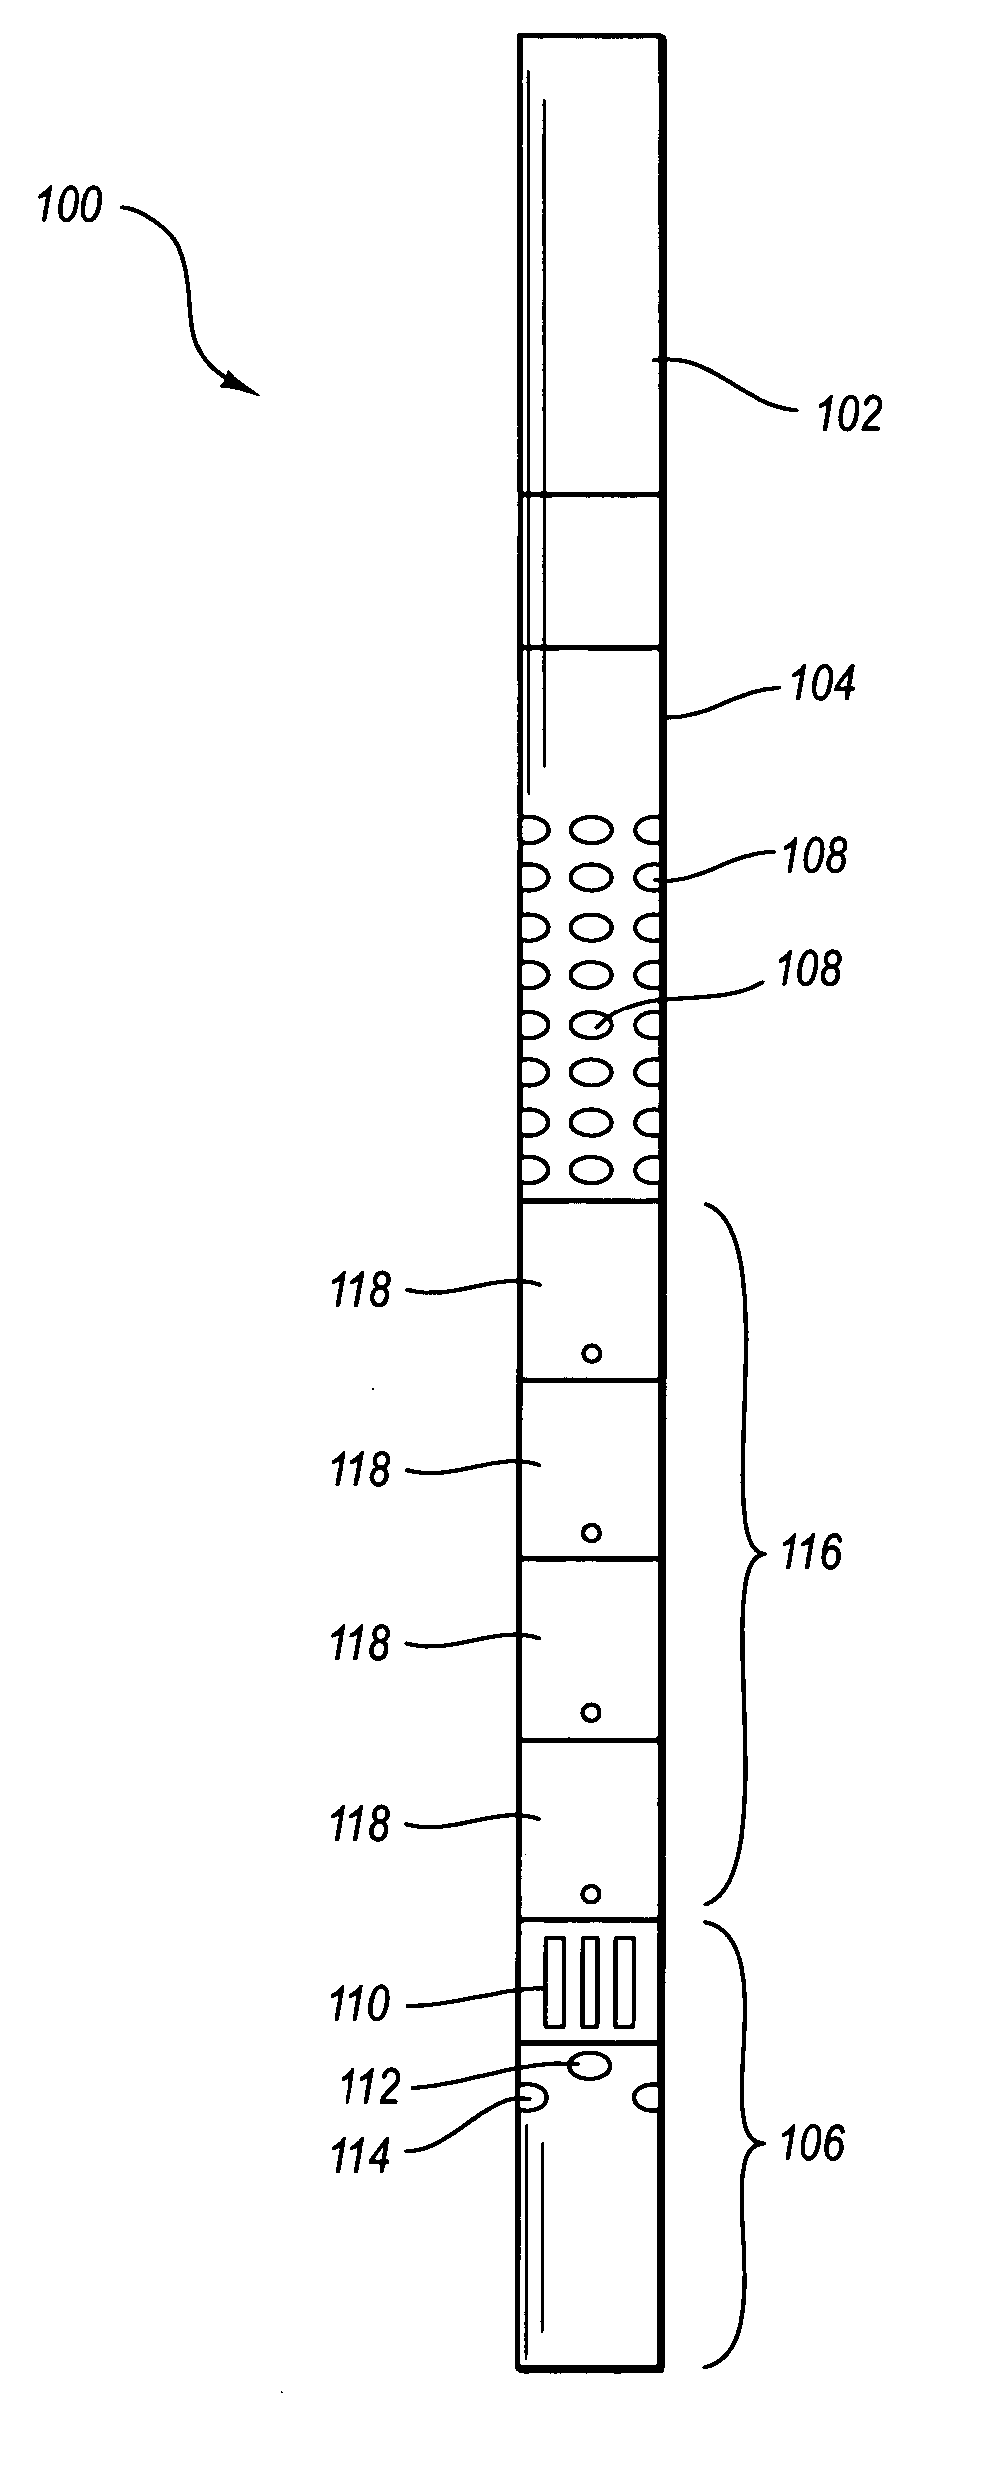 Acoustic isolator between downhole transmitters and receivers